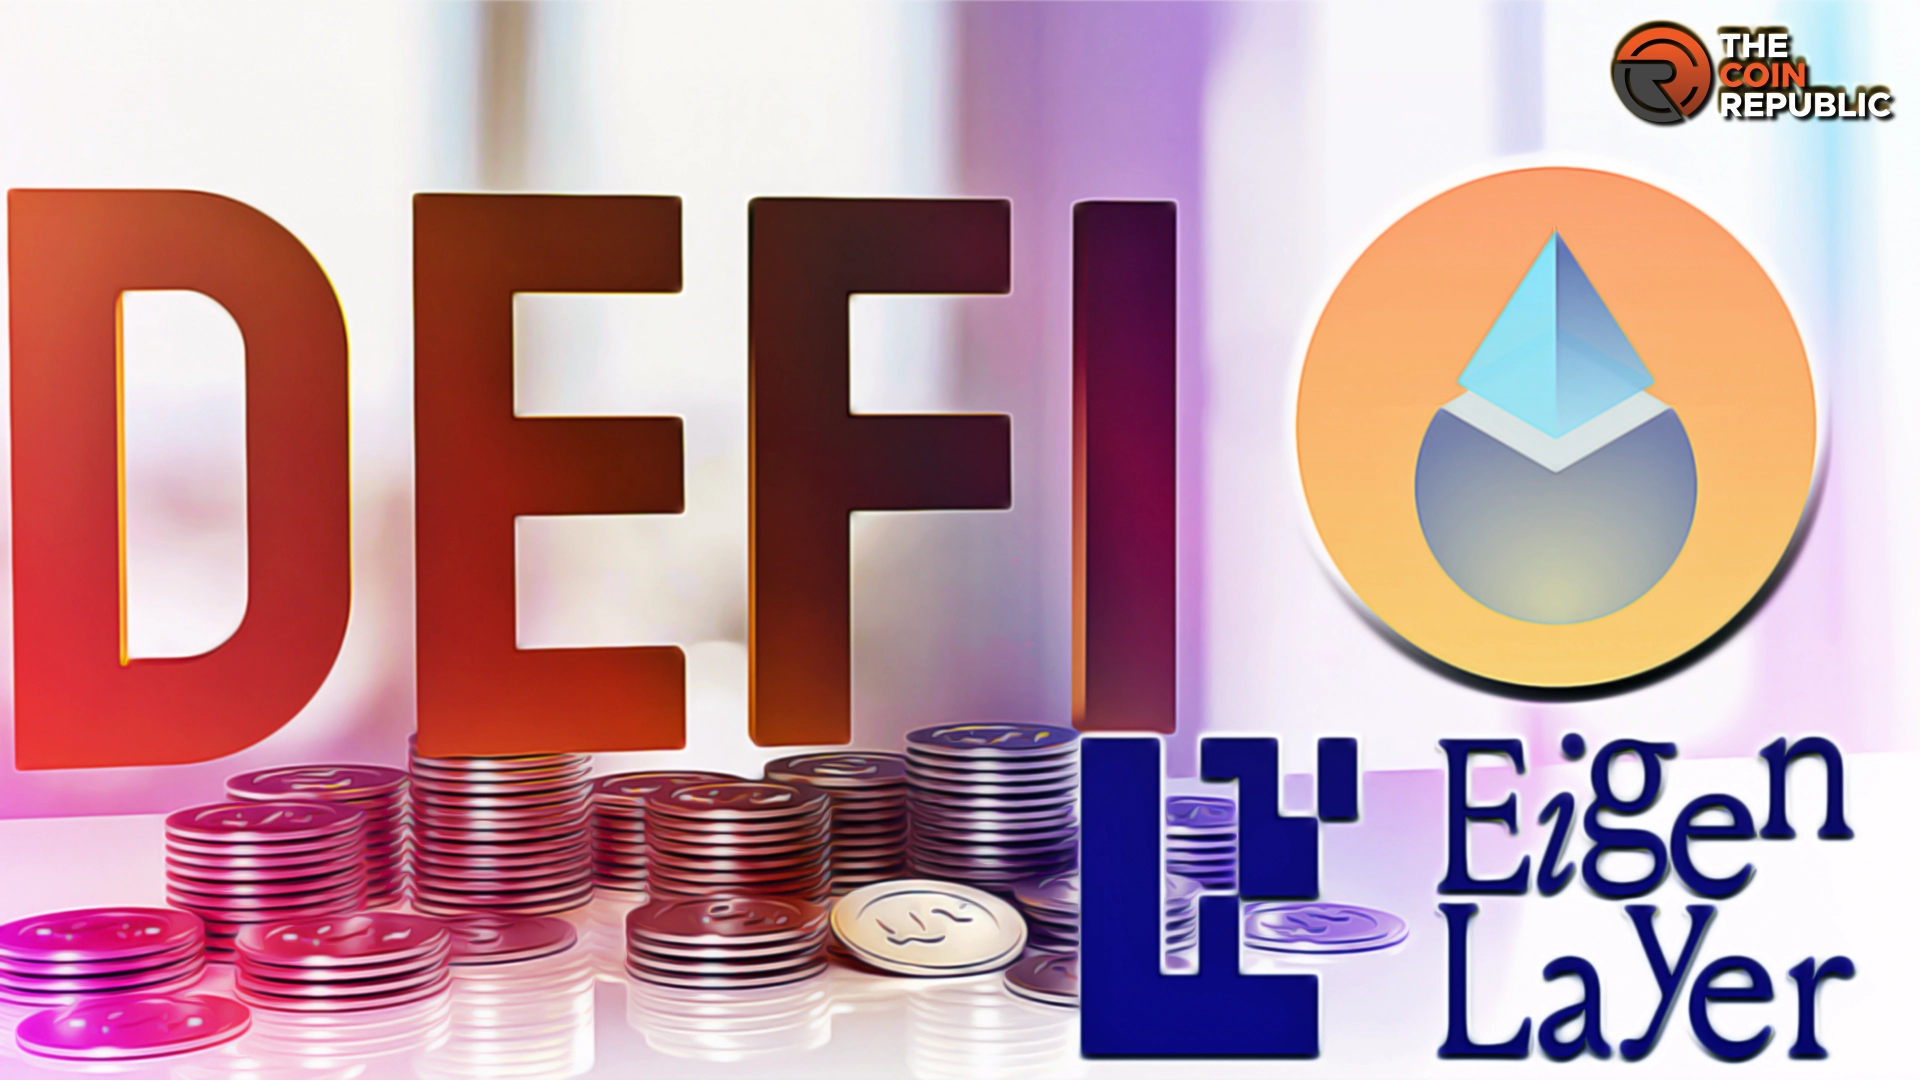 Lido Co-Founders Funding EigenLayer’s Rival: Pointing DeFi Battle?